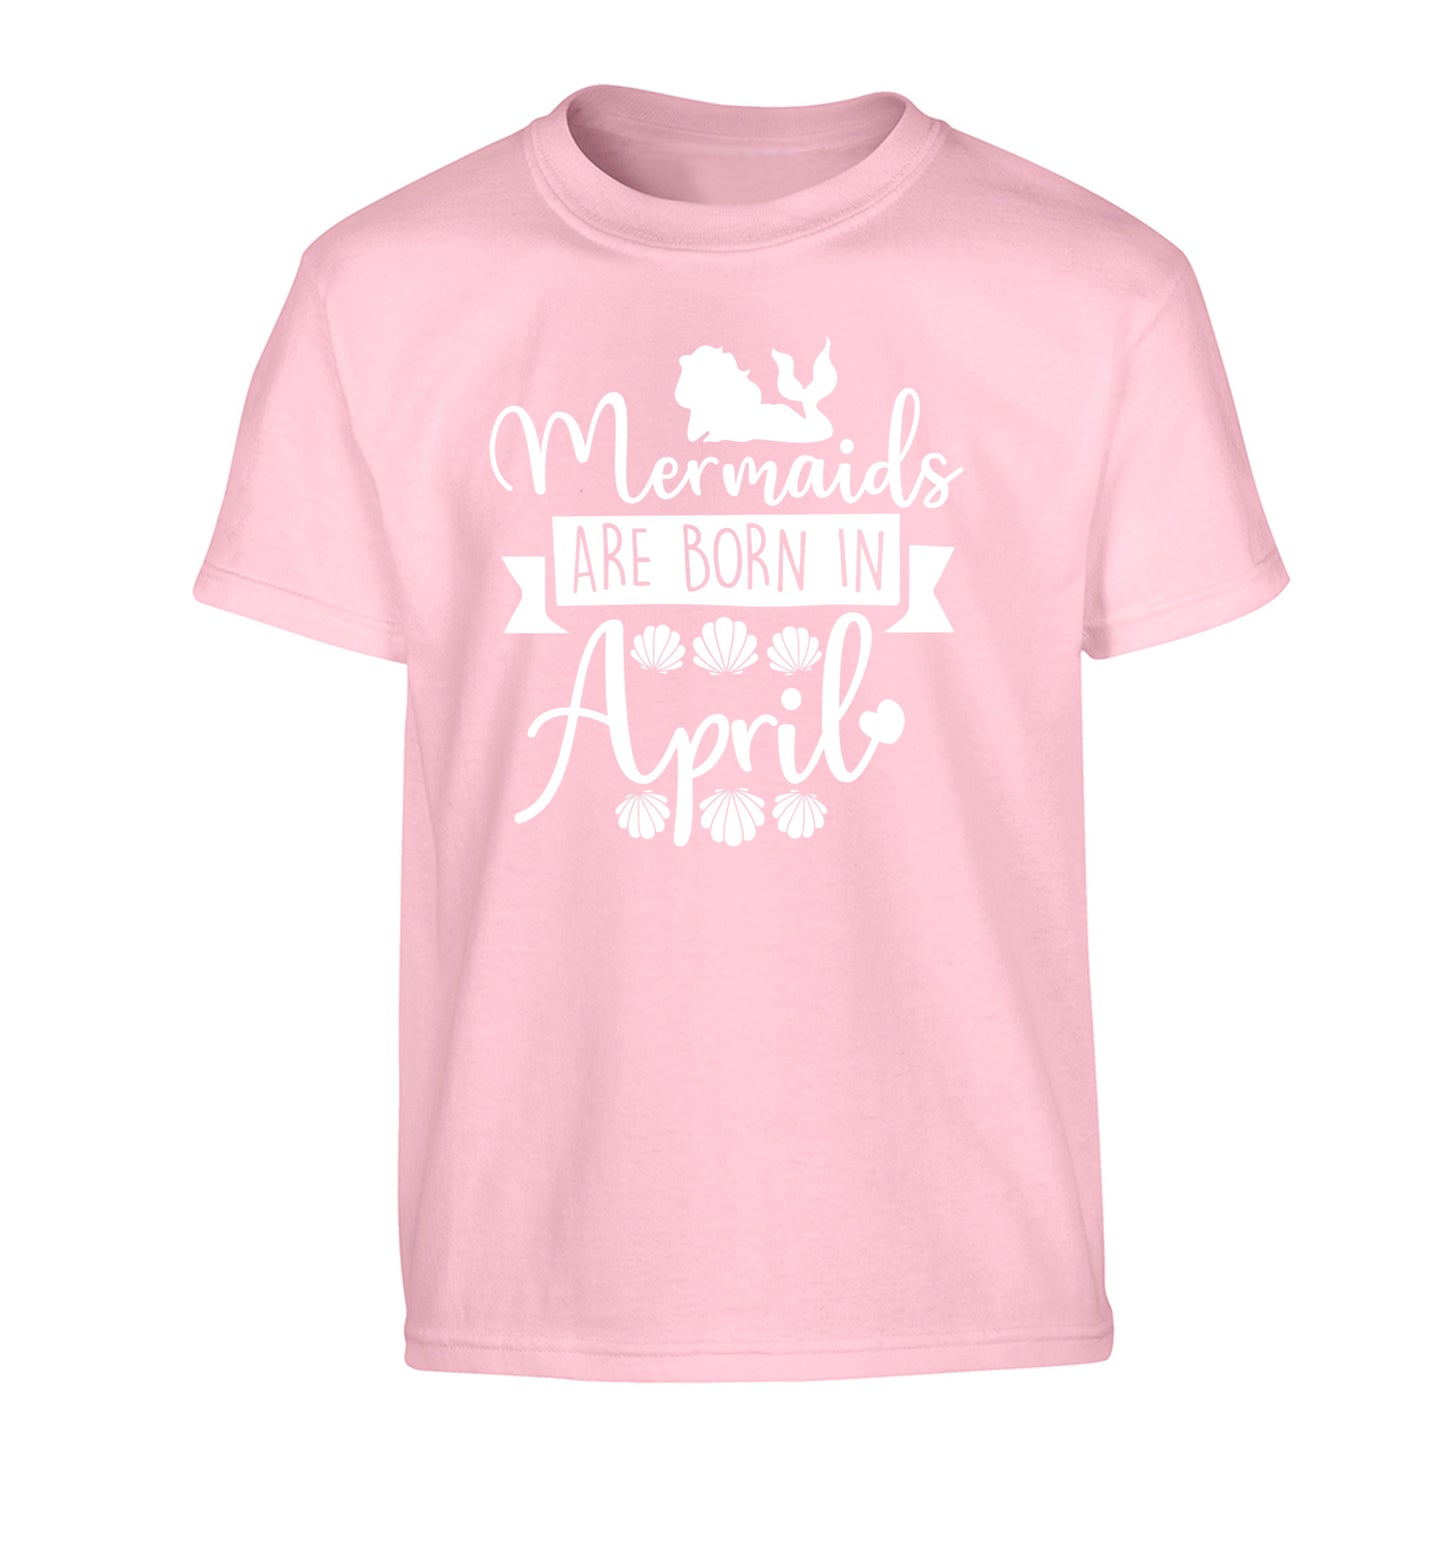 Mermaids are born in April Children's light pink Tshirt 12-13 Years